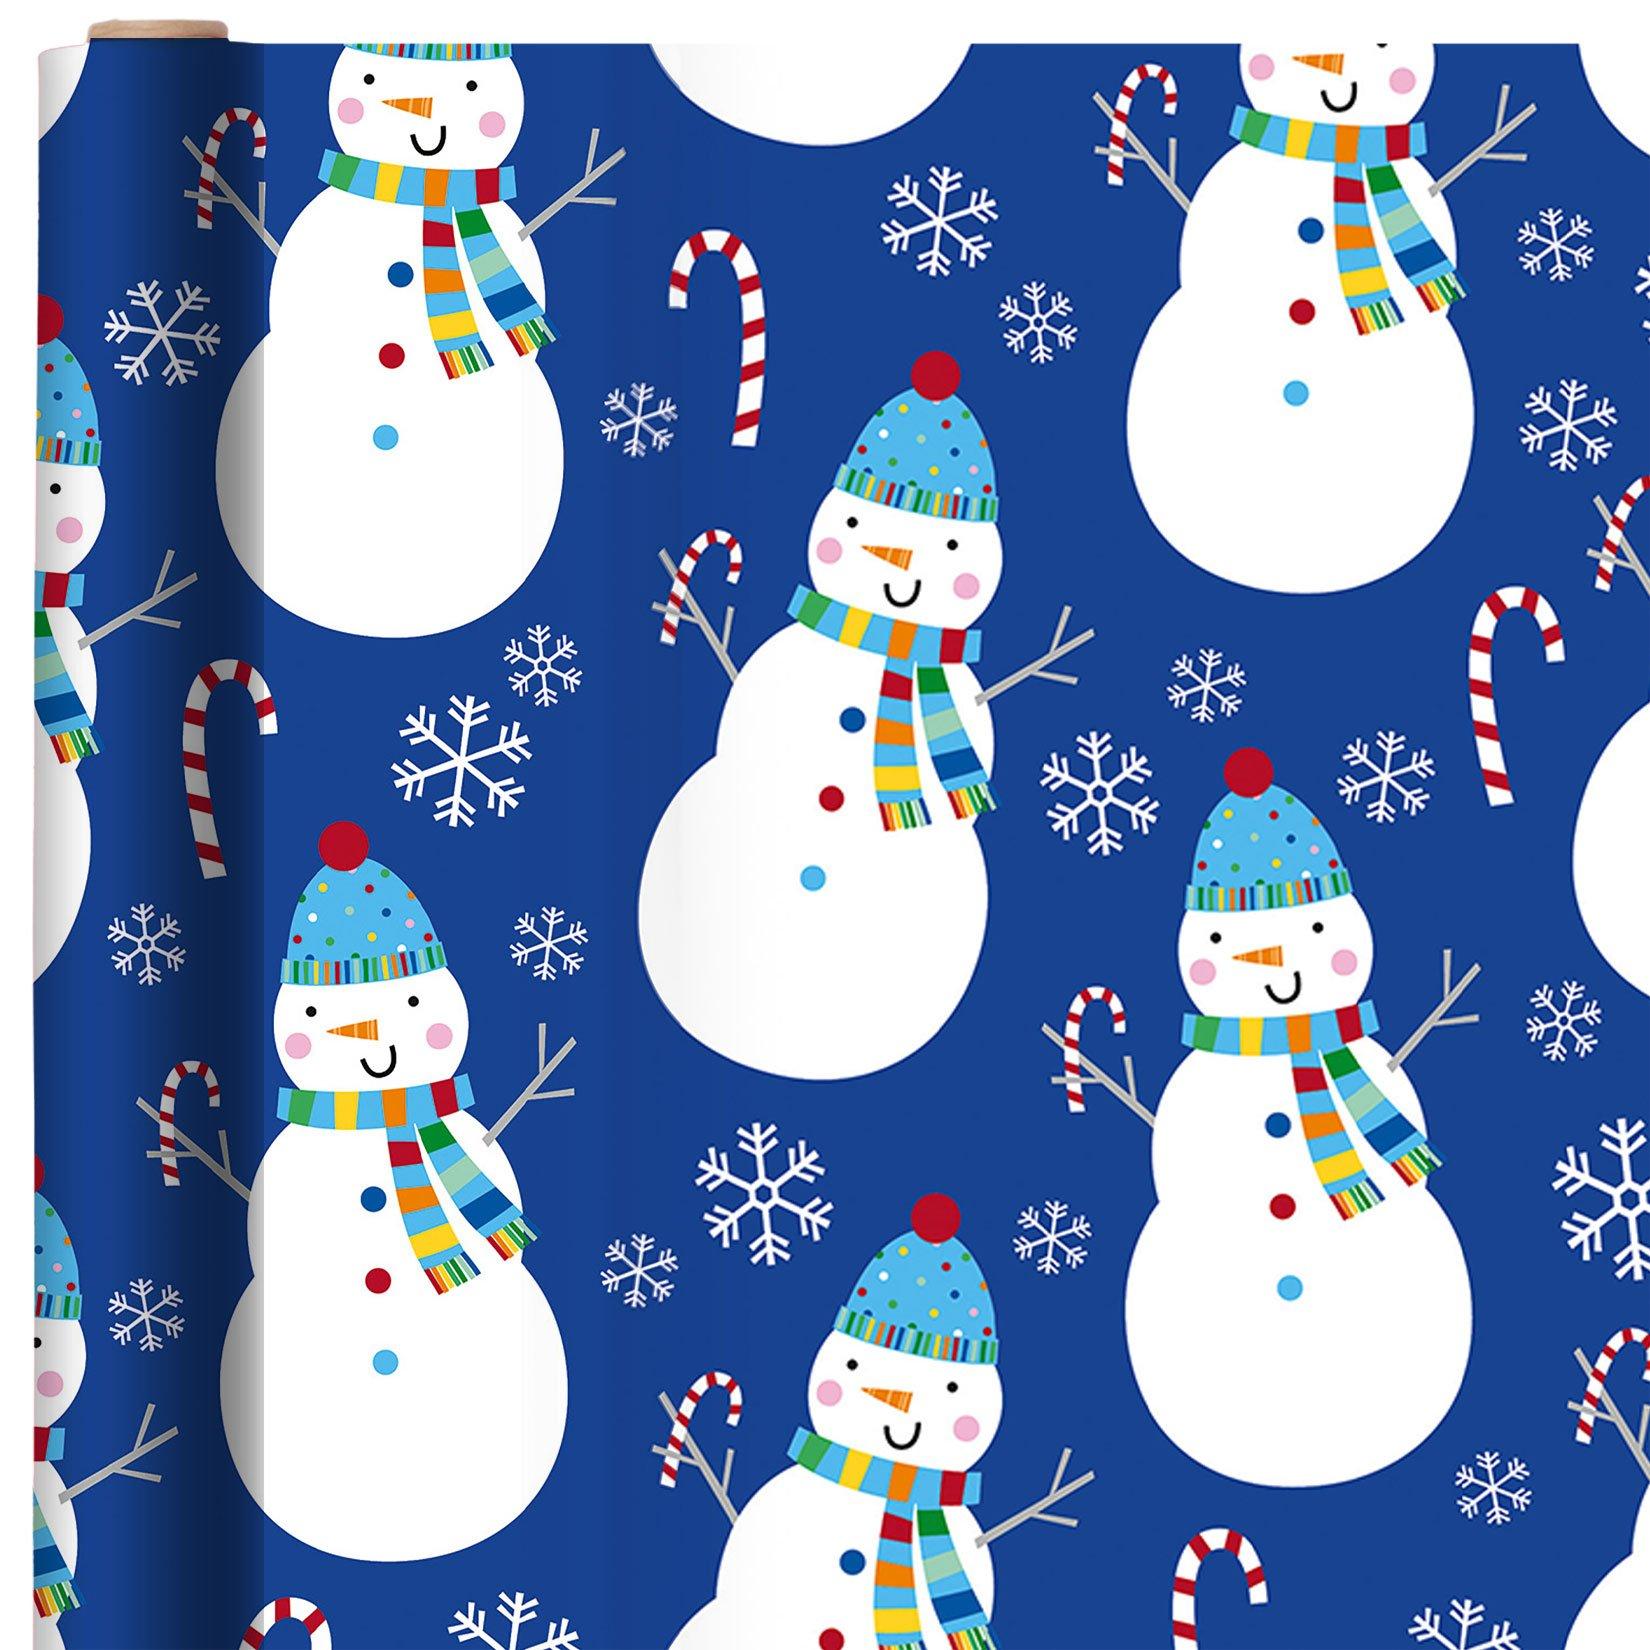 Snowman Party Christmas Gift Wrap Full Ream 833 ft x 30 in